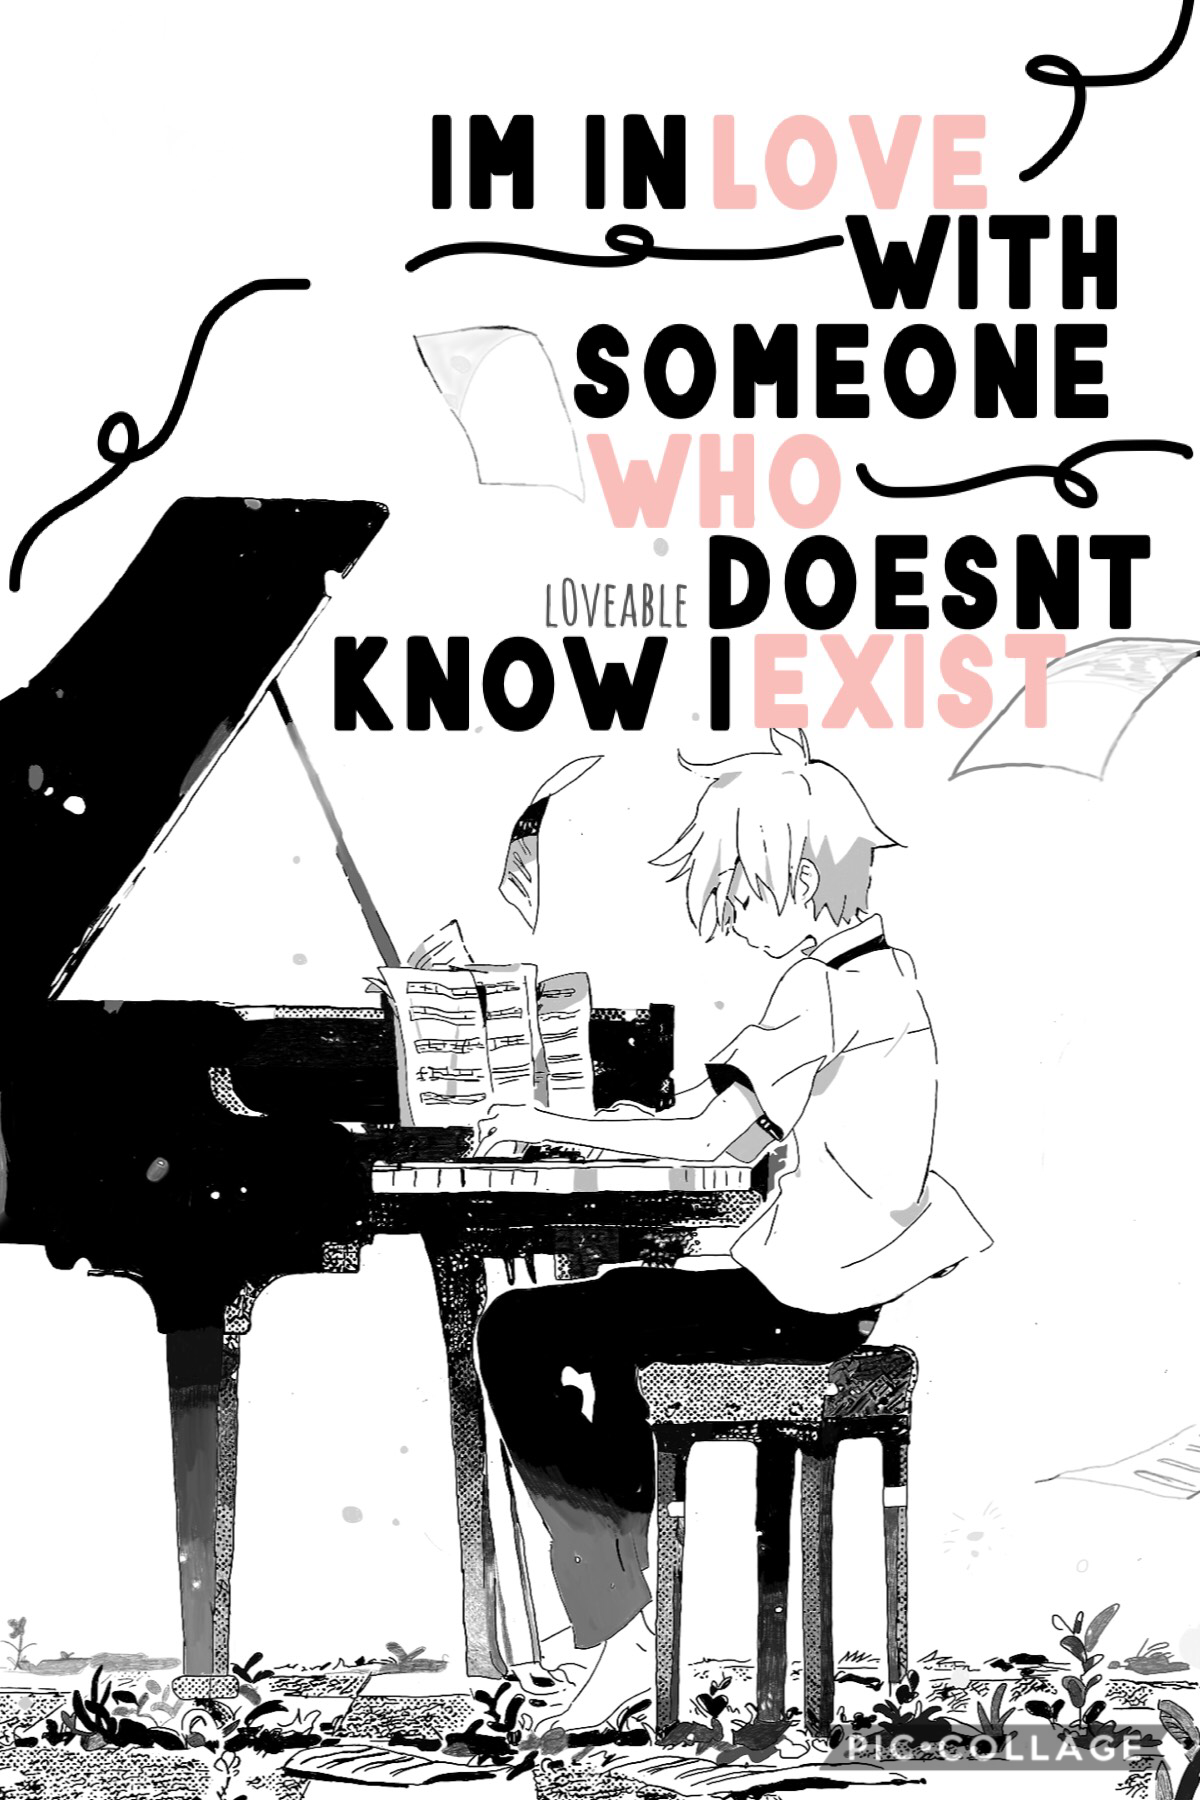 This is my recreation of the Soul Eater Doujinshi called “Rendevous Pitch”. I LOVE THE AUTHOR’S DRAWING STYLE! How well do you think I did? :) Totally feeling this song lyric right now~ spontaneous edit.